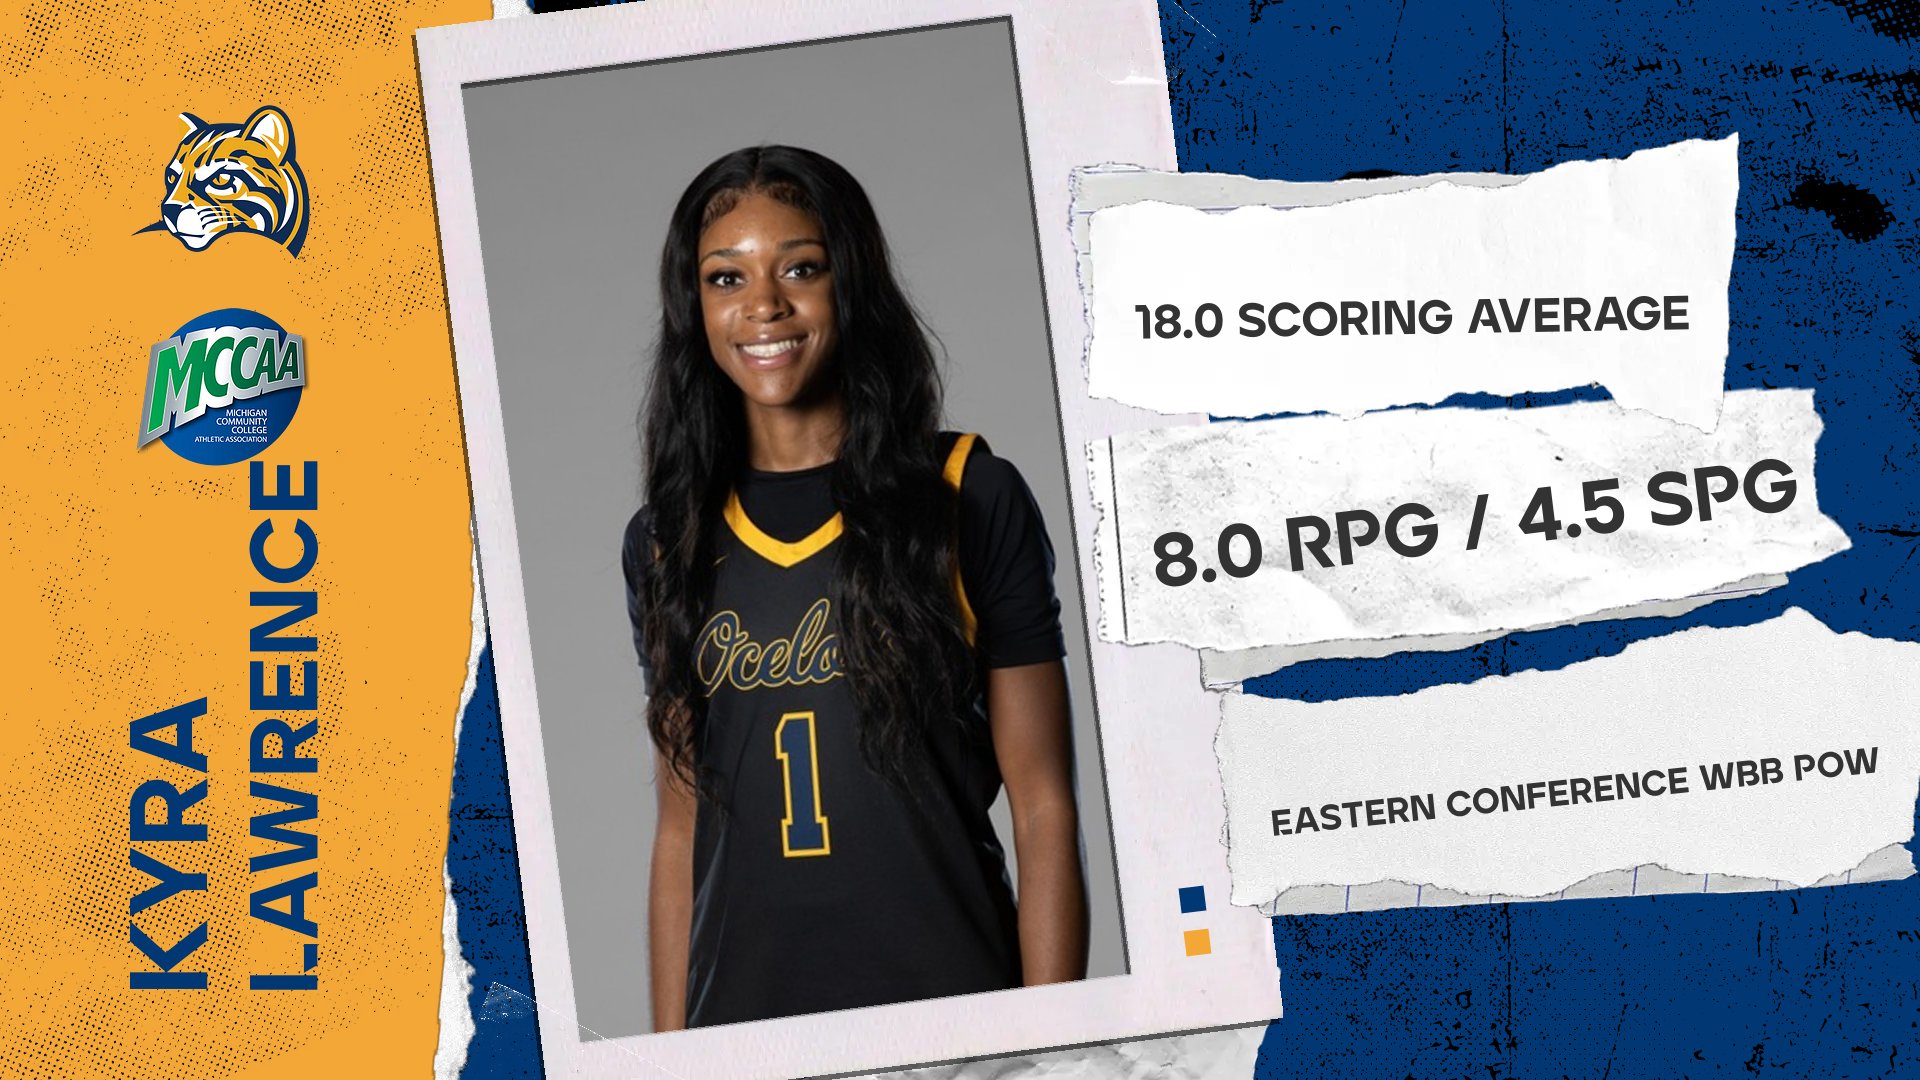 Schoolcraft's Lawrence Earns MCCAA Eastern Conference Women's Basketball Player of the Week13